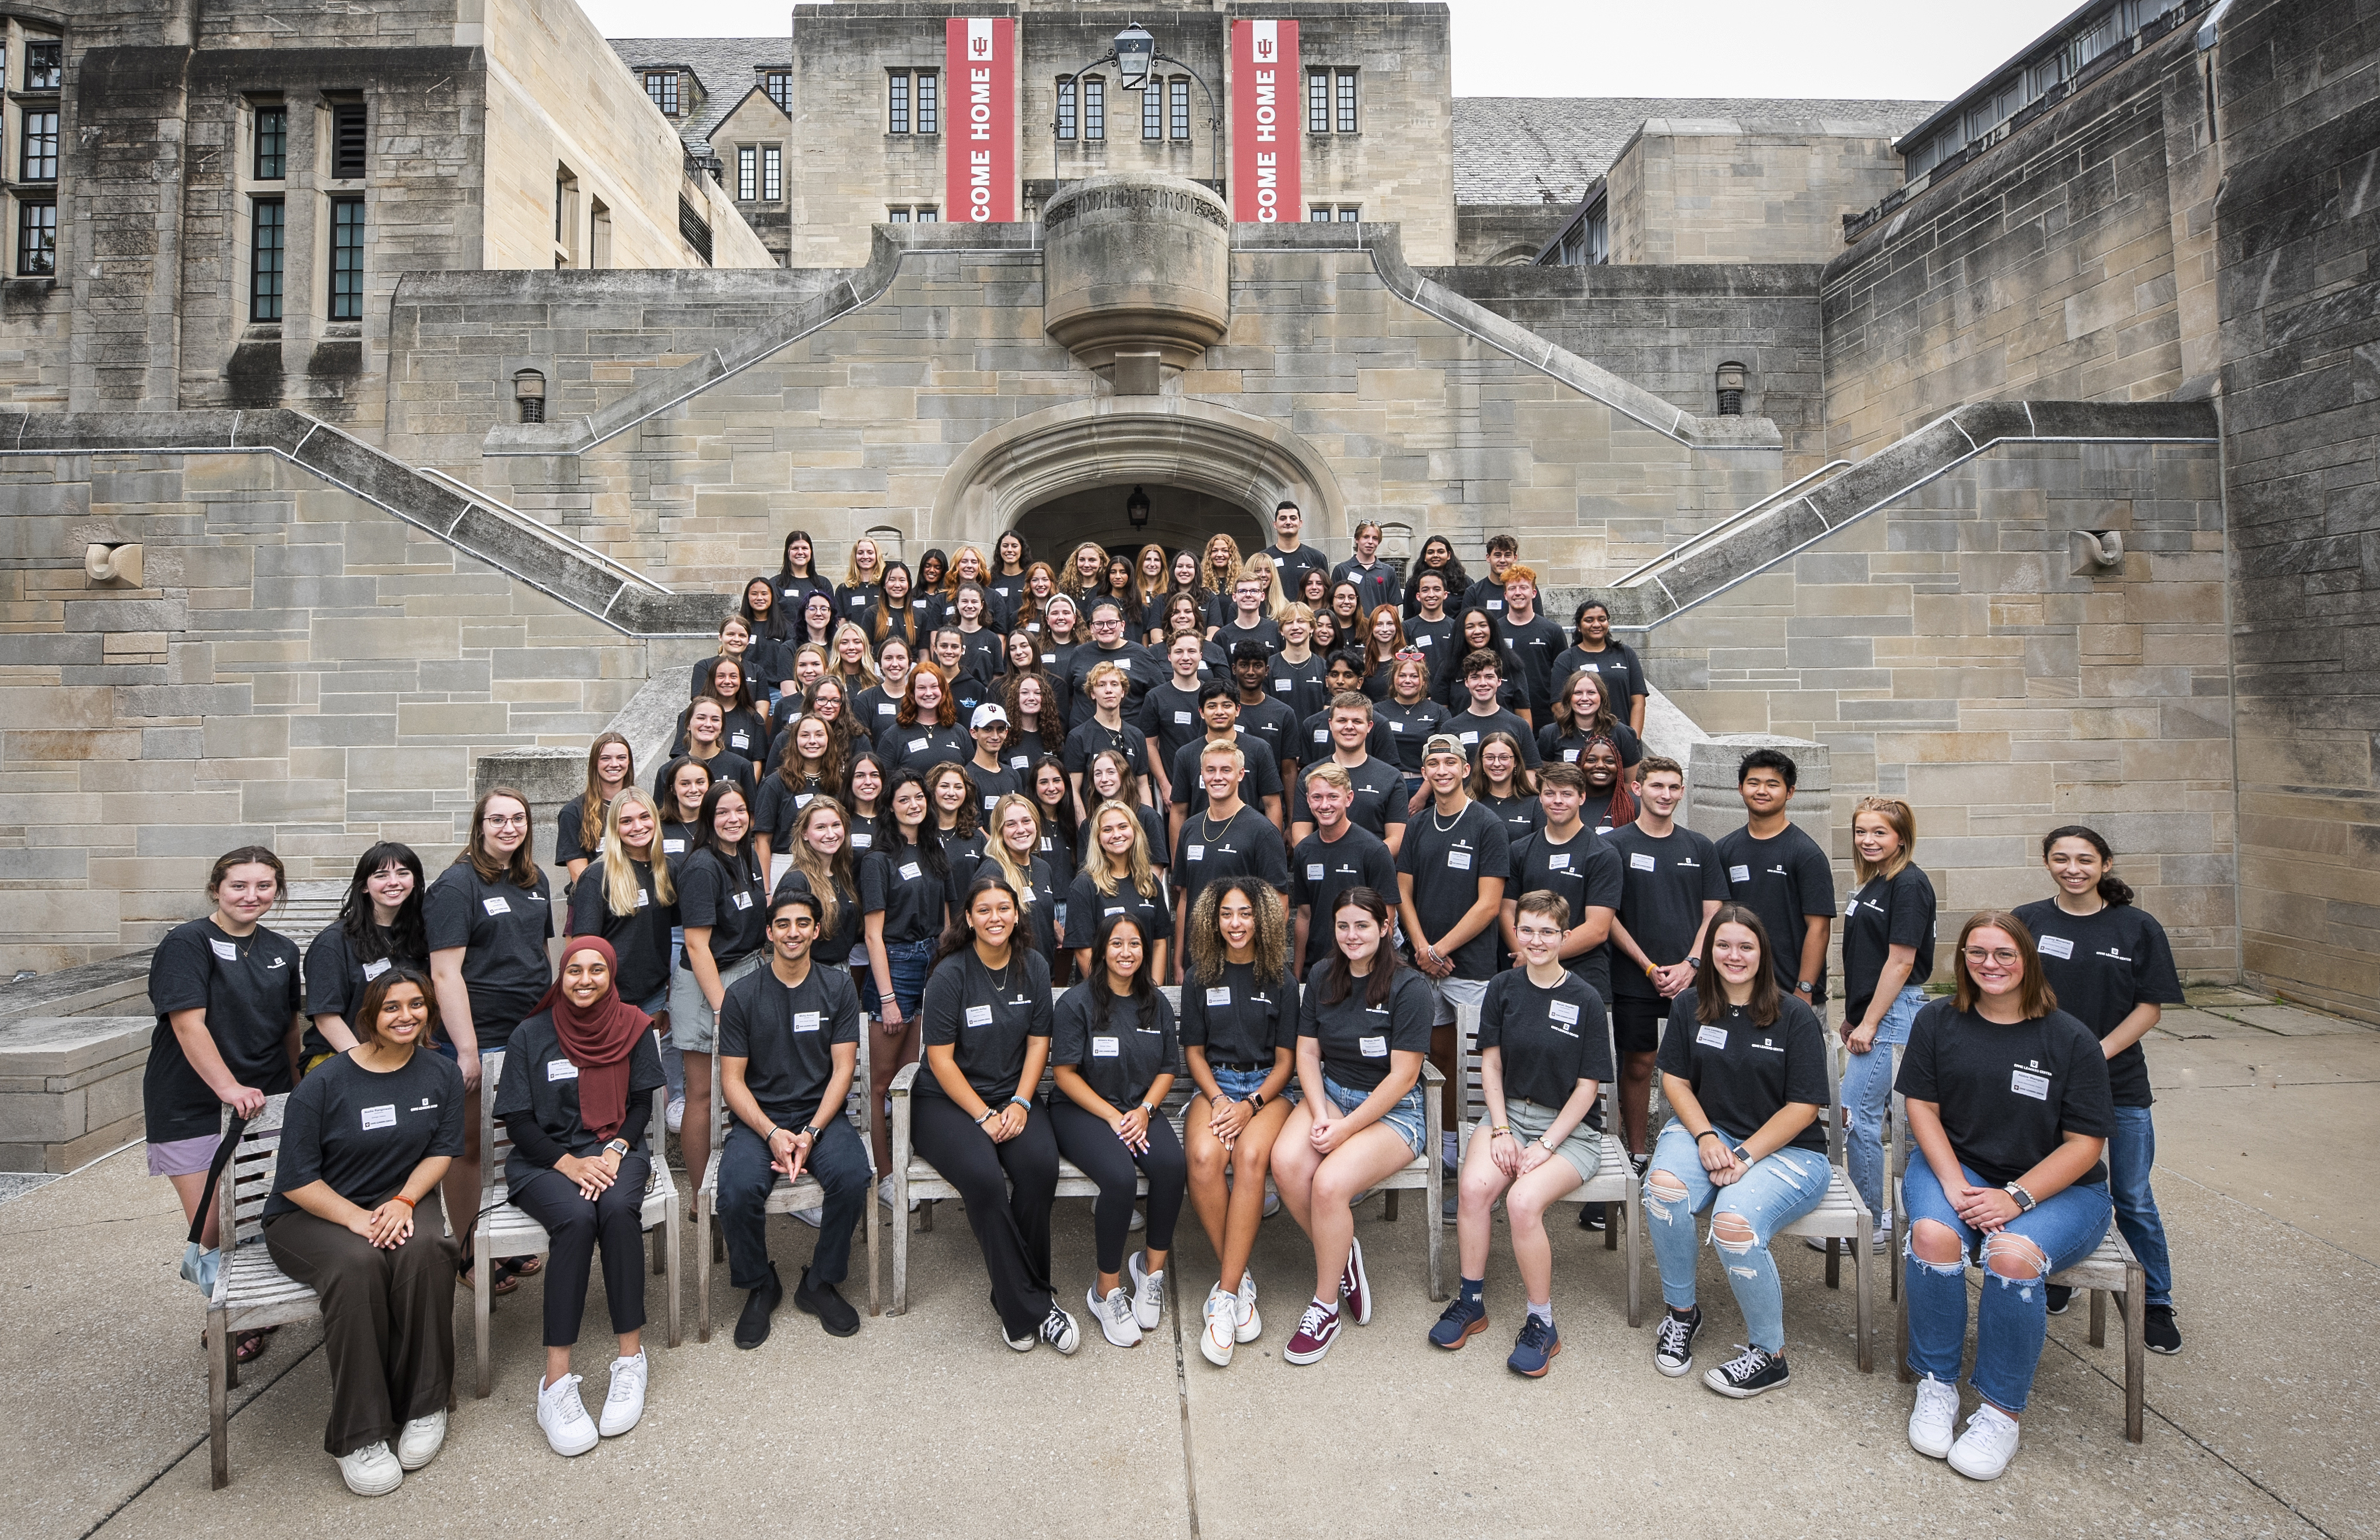 Civic Leaders Center Located in Briscoe at Indiana University, the IU Civic Leaders Living-Learning Center is comprised of diverse students dedicated to leading for the greater good. picture